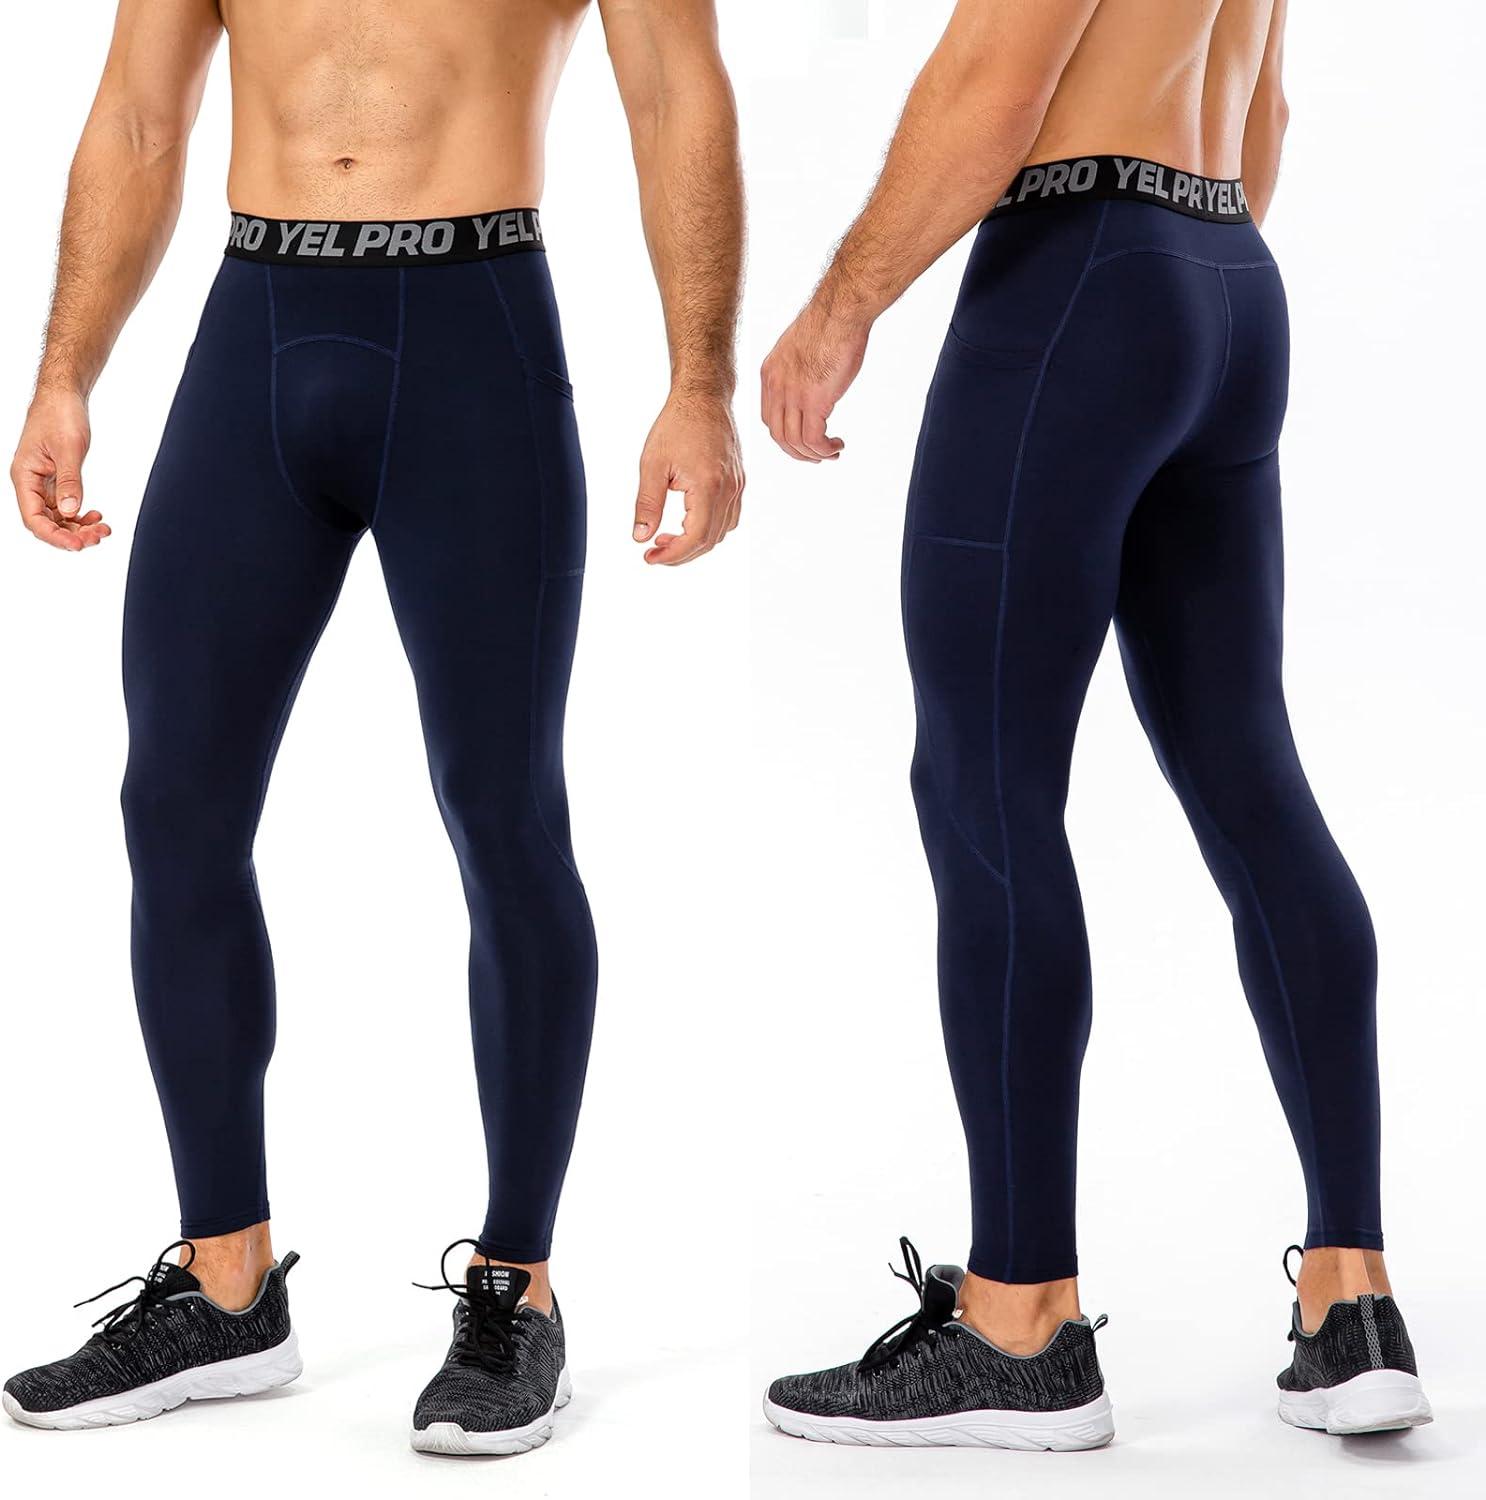 ABTIOYLLZ Men s Thermal Athletic Leggings Warm Compression Pants Pockets  Winter Baselayer Running Tights Underwear Bottoms 1 Pack #Navy #26 Small